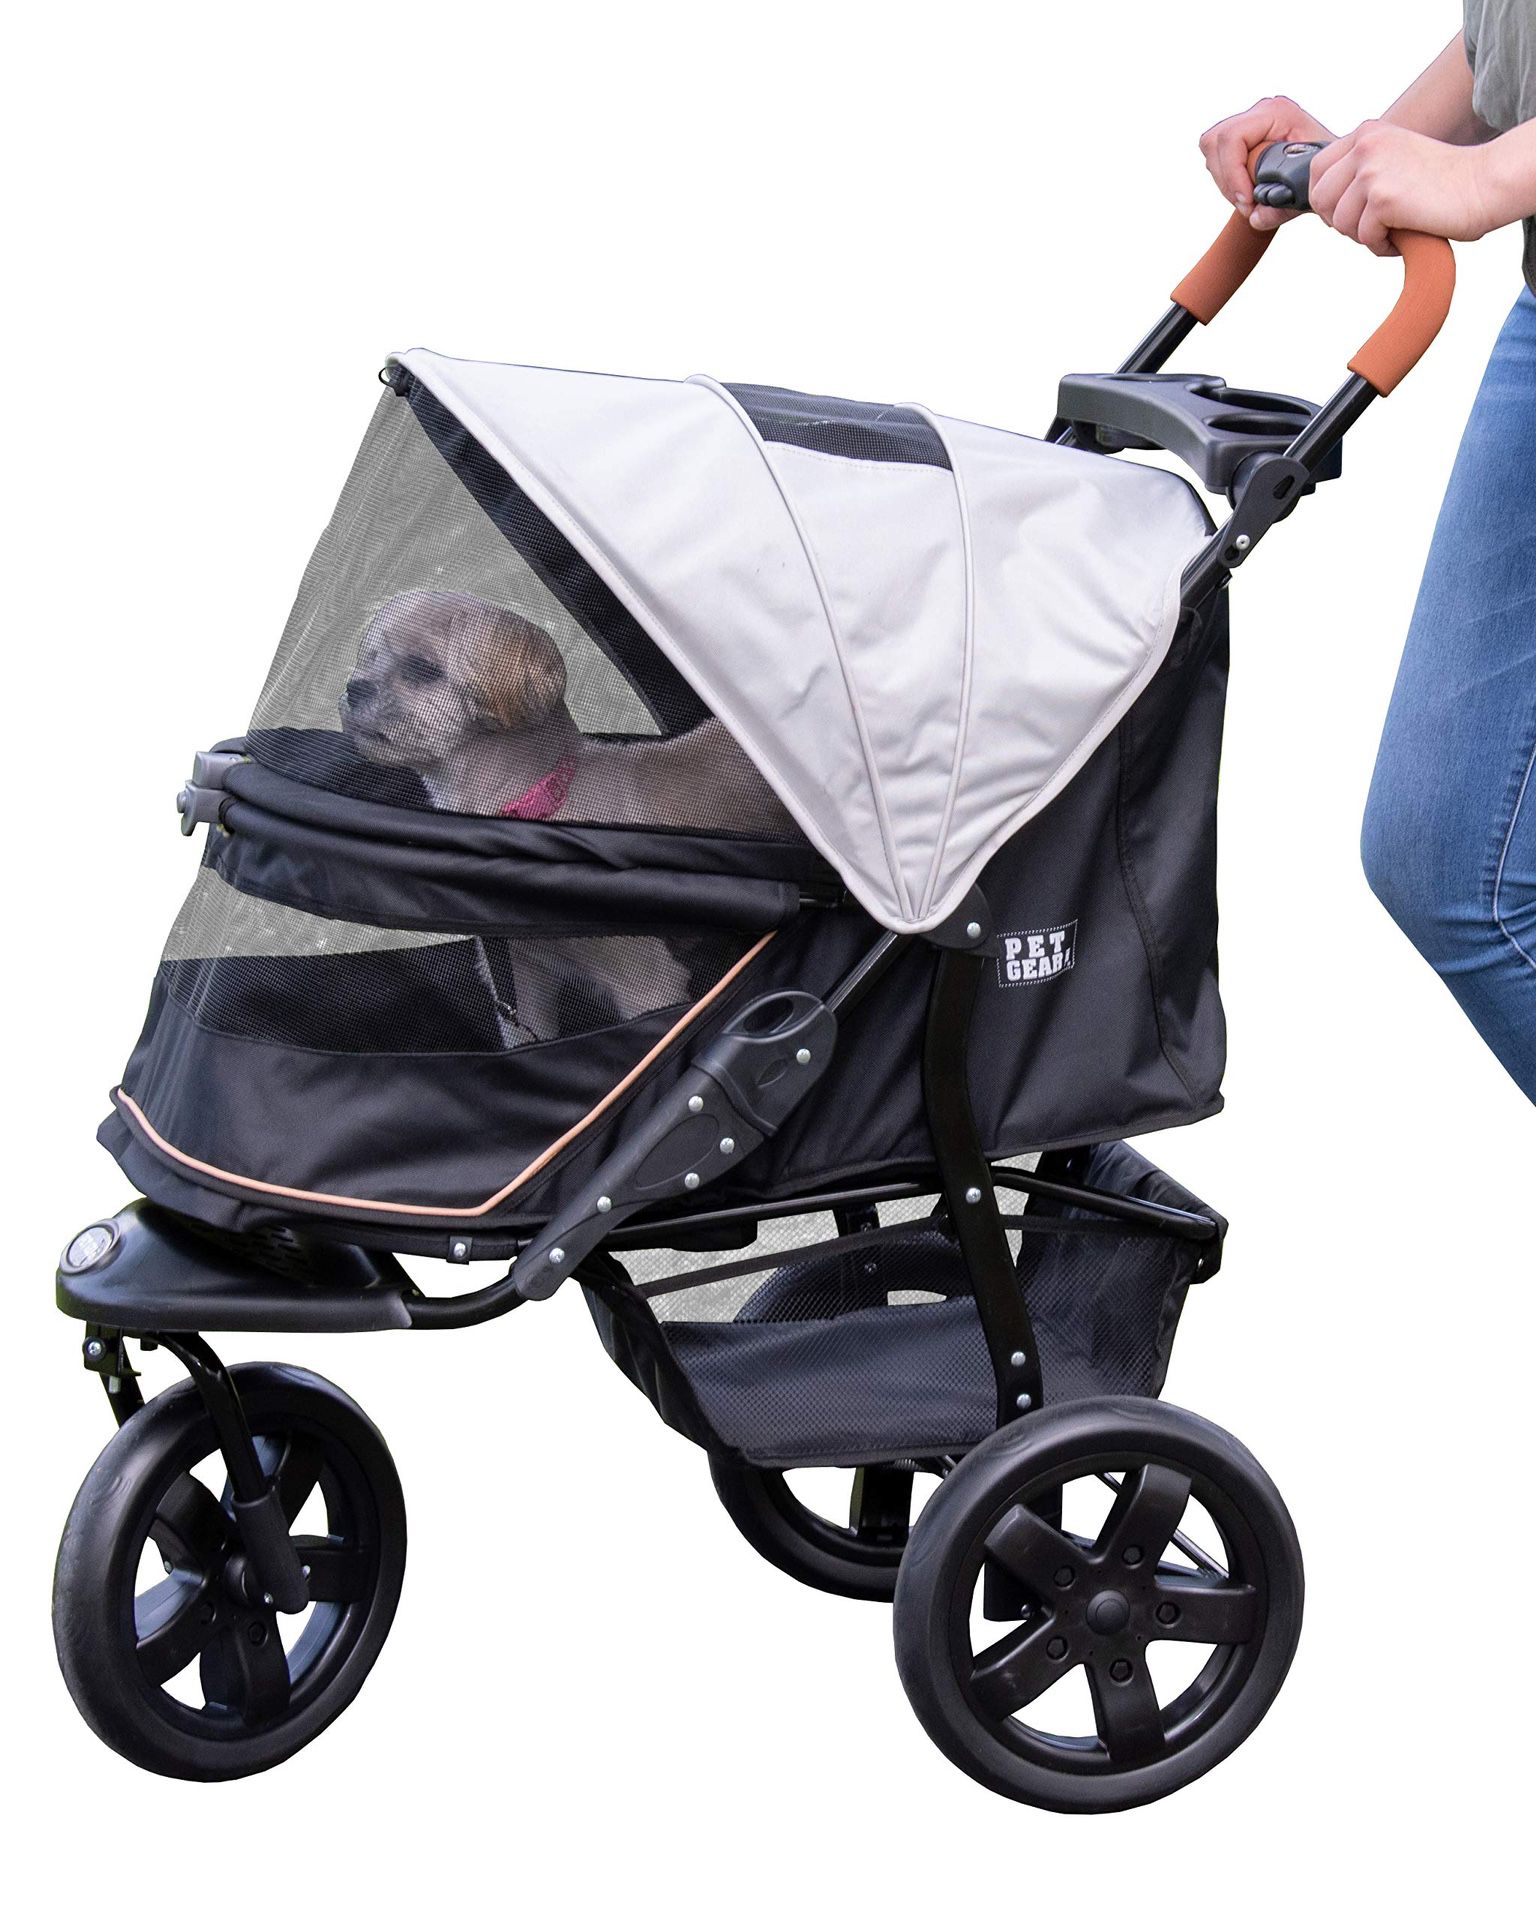 Pet Gear No-Zip AT3 Pet Stroller For Cats/Dogs, Zipperless Entry, Easy One-Hand Fold, Jogging Tires Grey